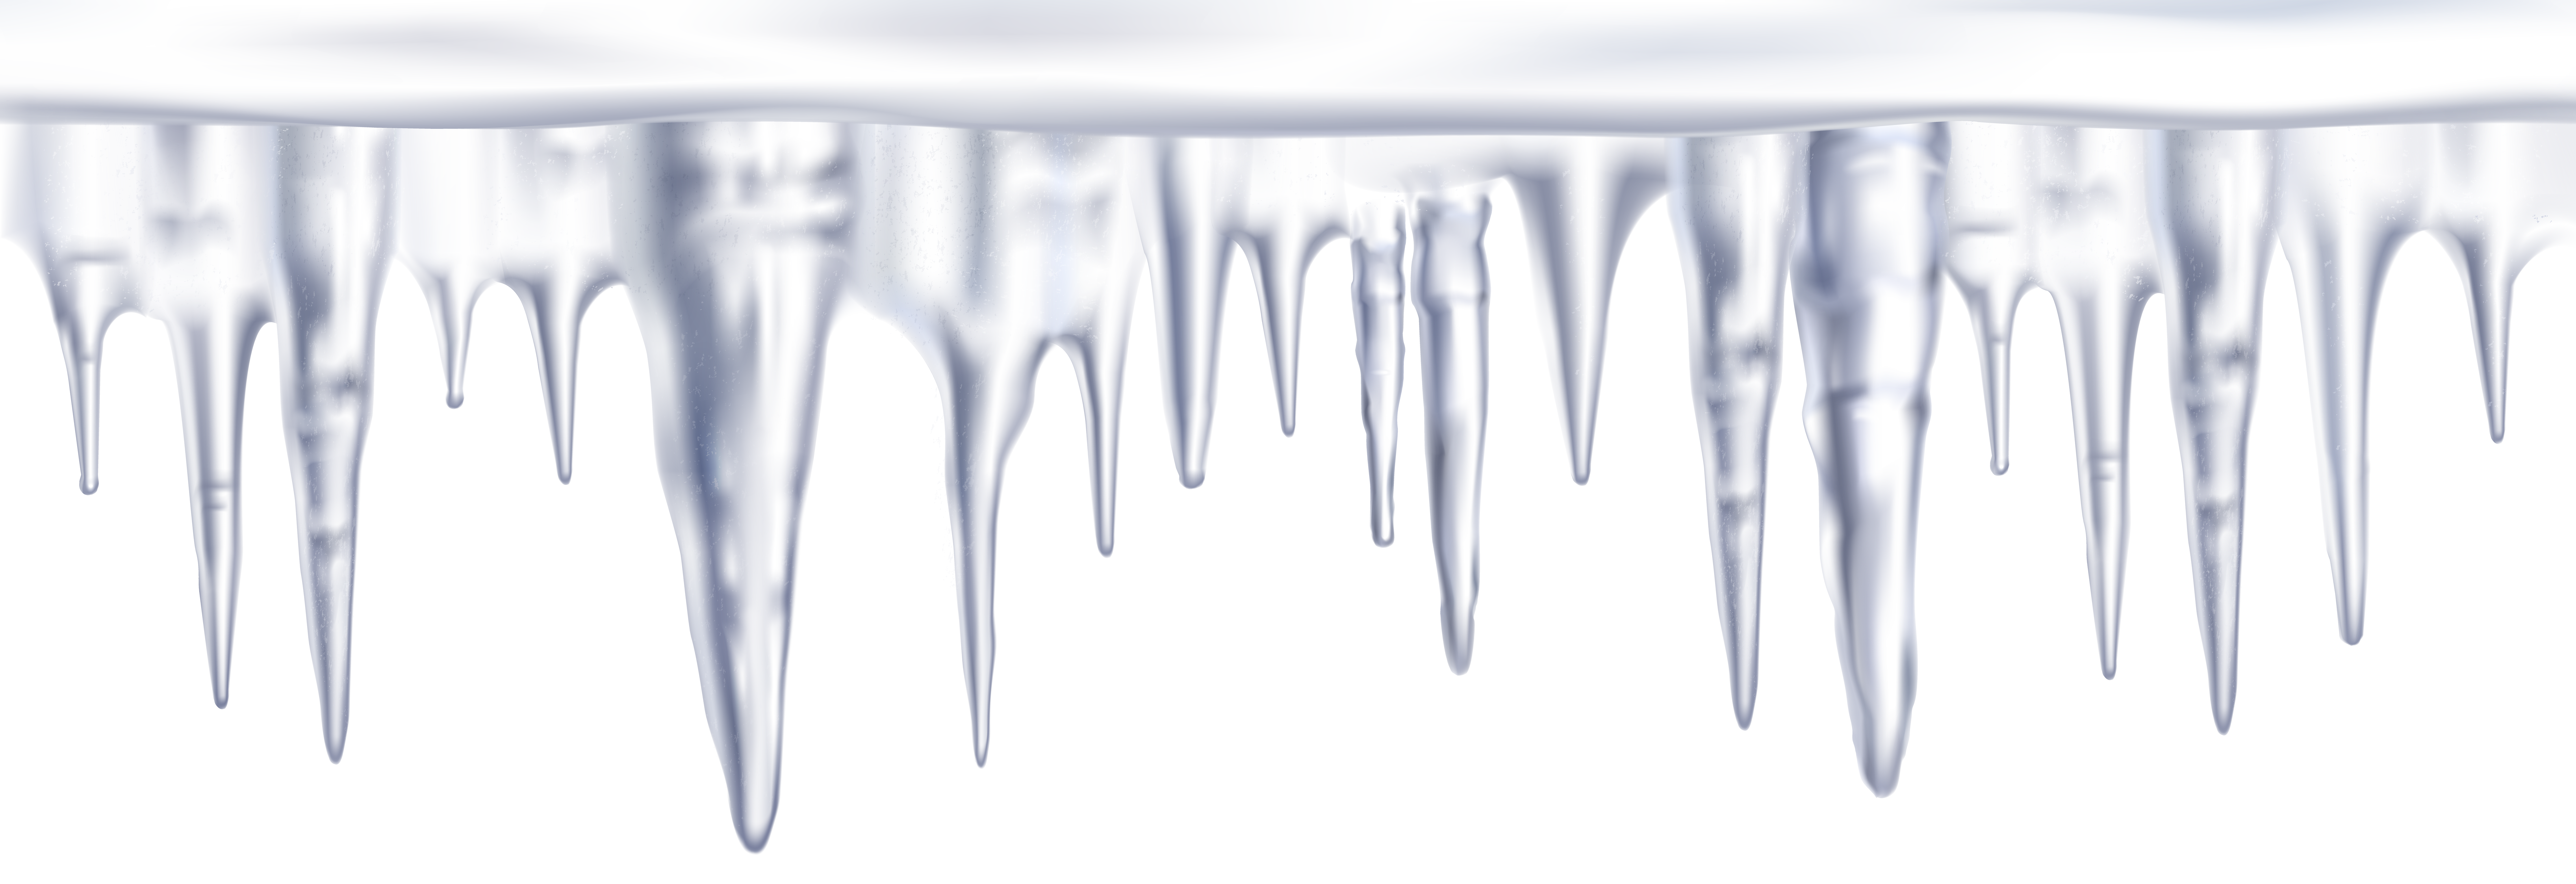 Icicles Transparent Clip Art Image | Gallery Yopriceville - High ...